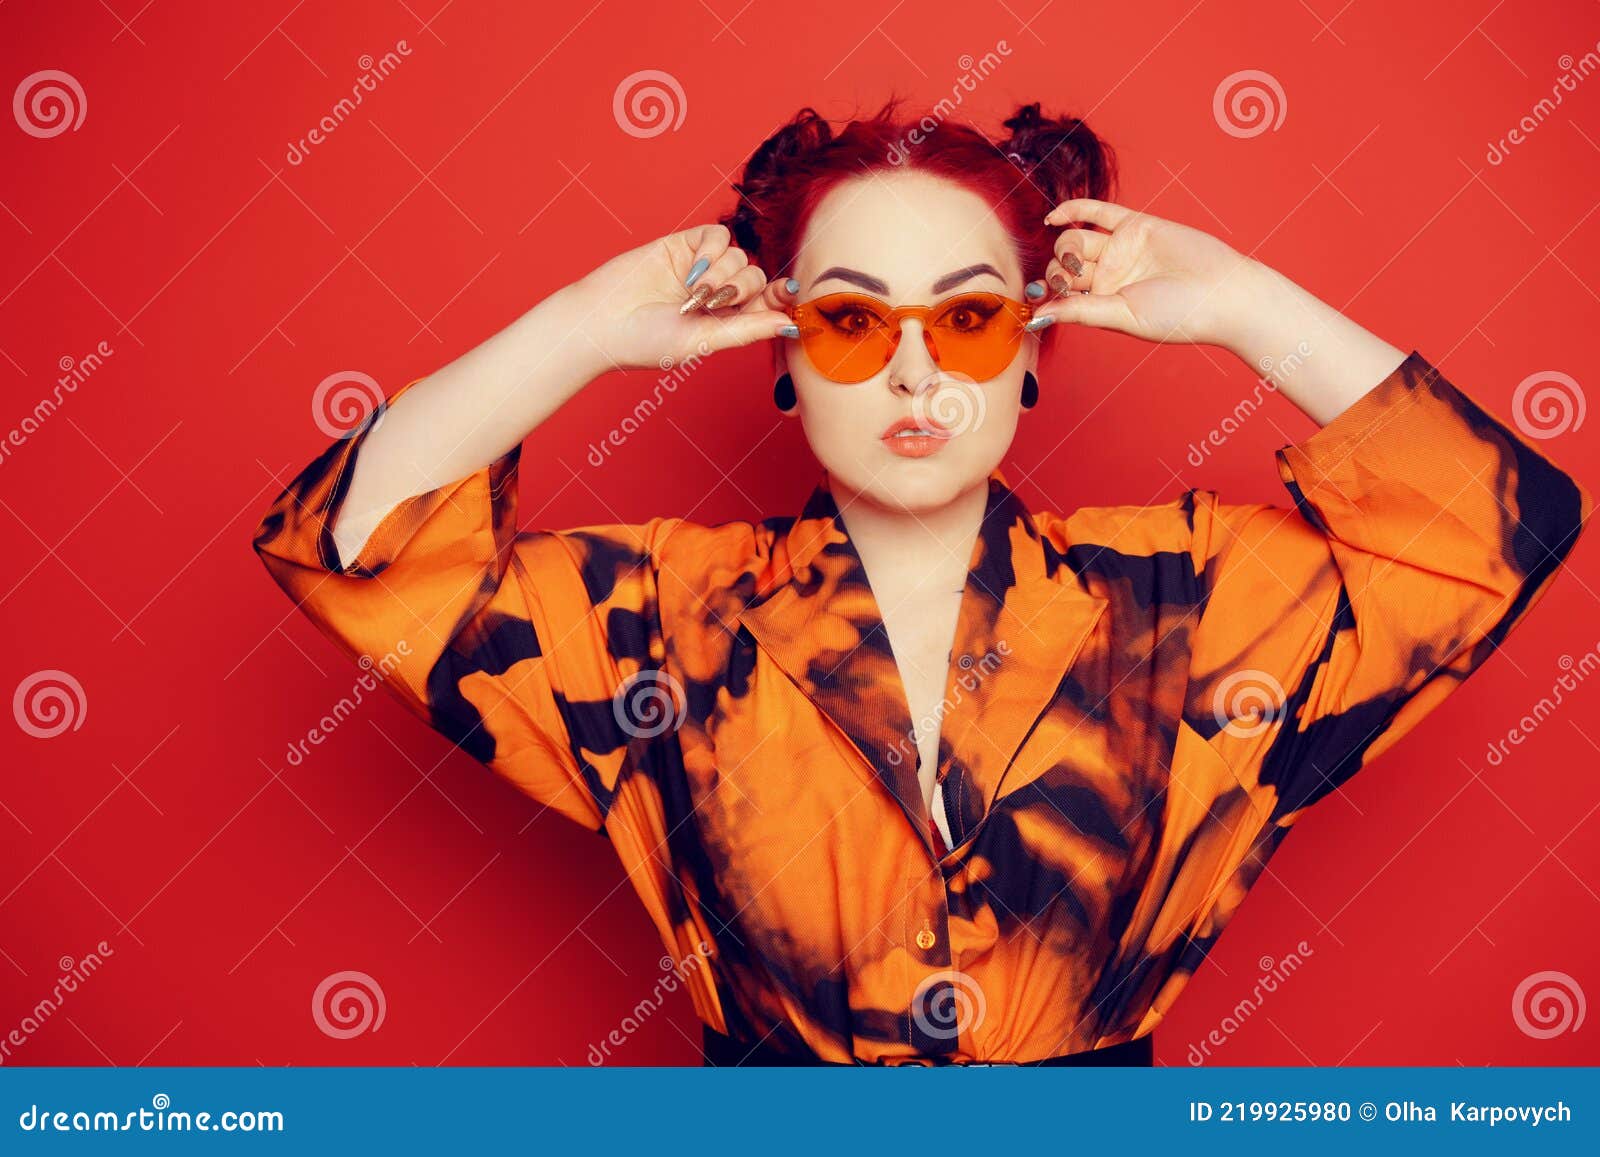 cute girl red background hair tunnels ears dress lips anime poses orange sunglasses two buns her head looks 219925980